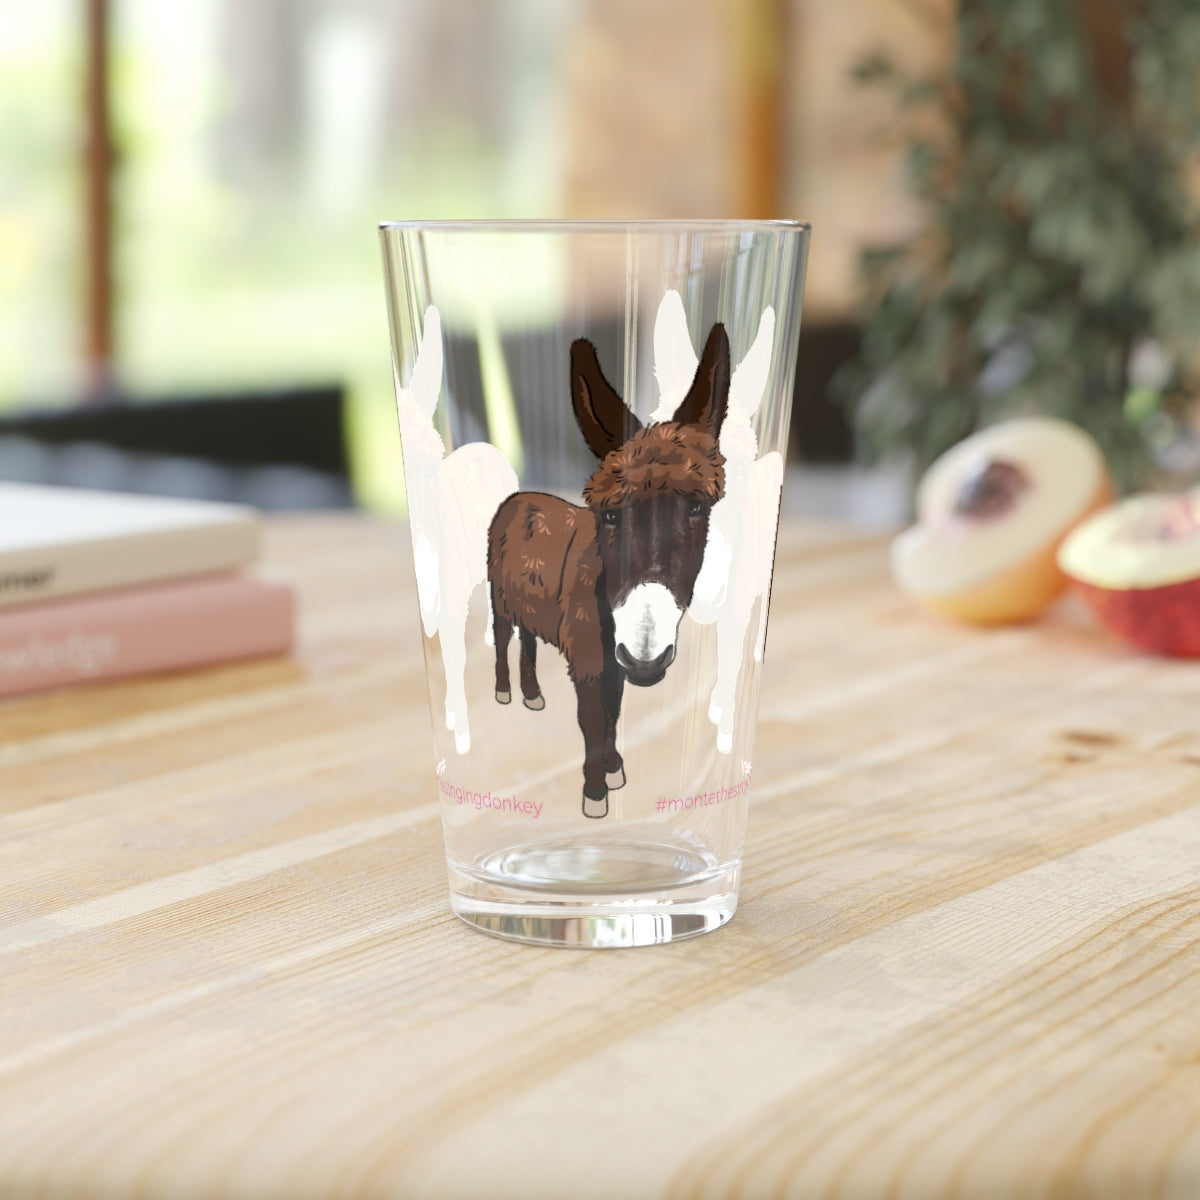 Monte the Singing Donkey - Classic Pint Glass, 16oz